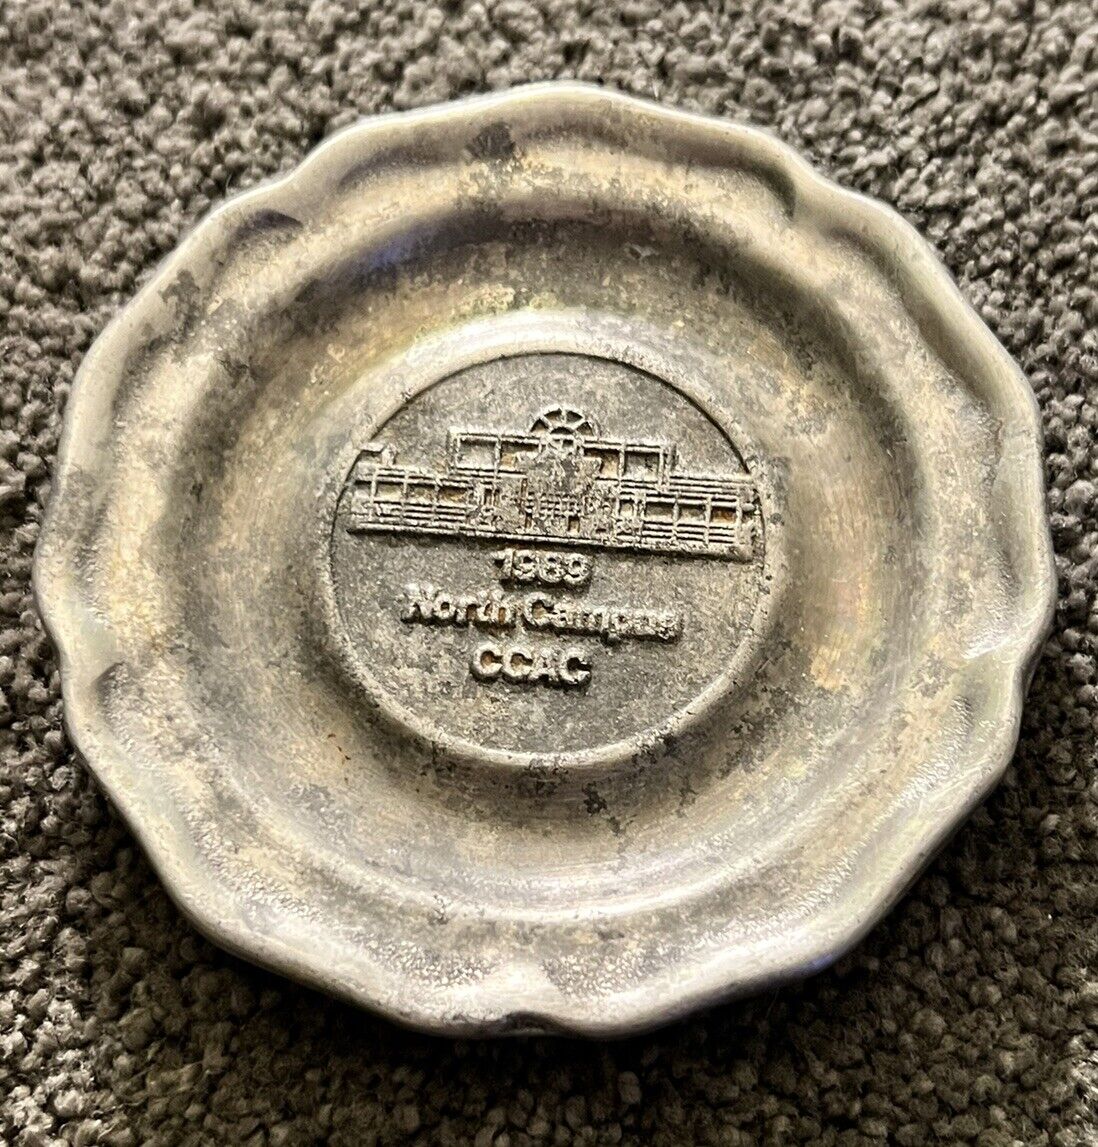 Vintage Pewtarex York PA Pewter Dish Plate Coaster CCAC Allegheny Commu. College